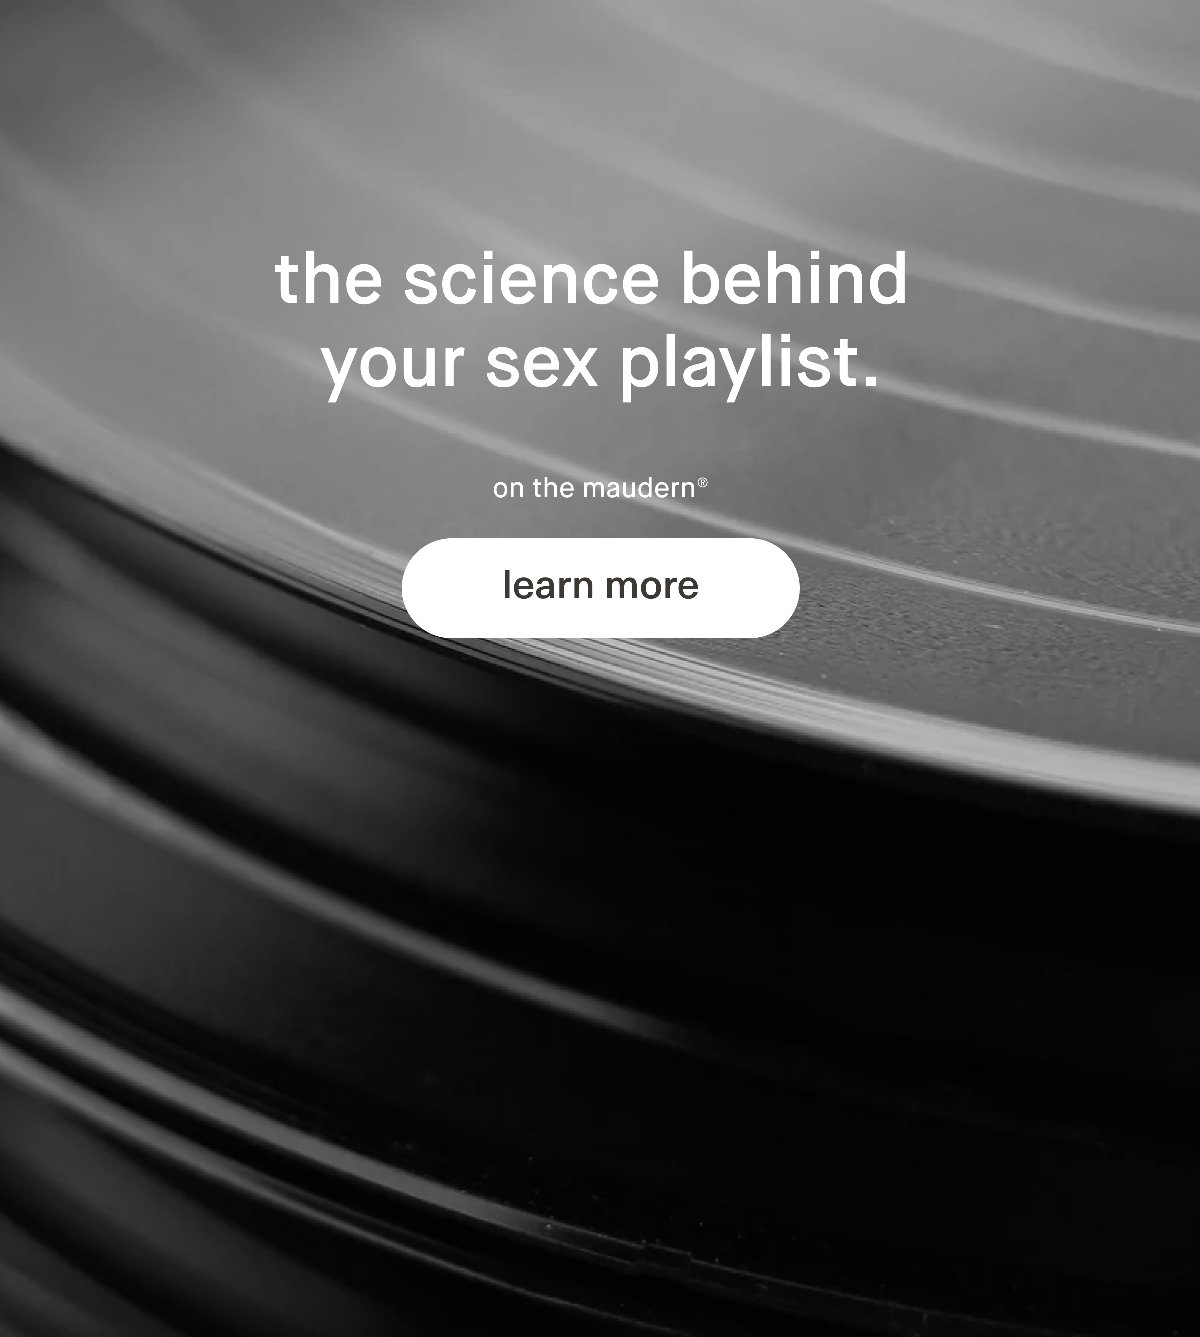 the science behind your sex playlist.